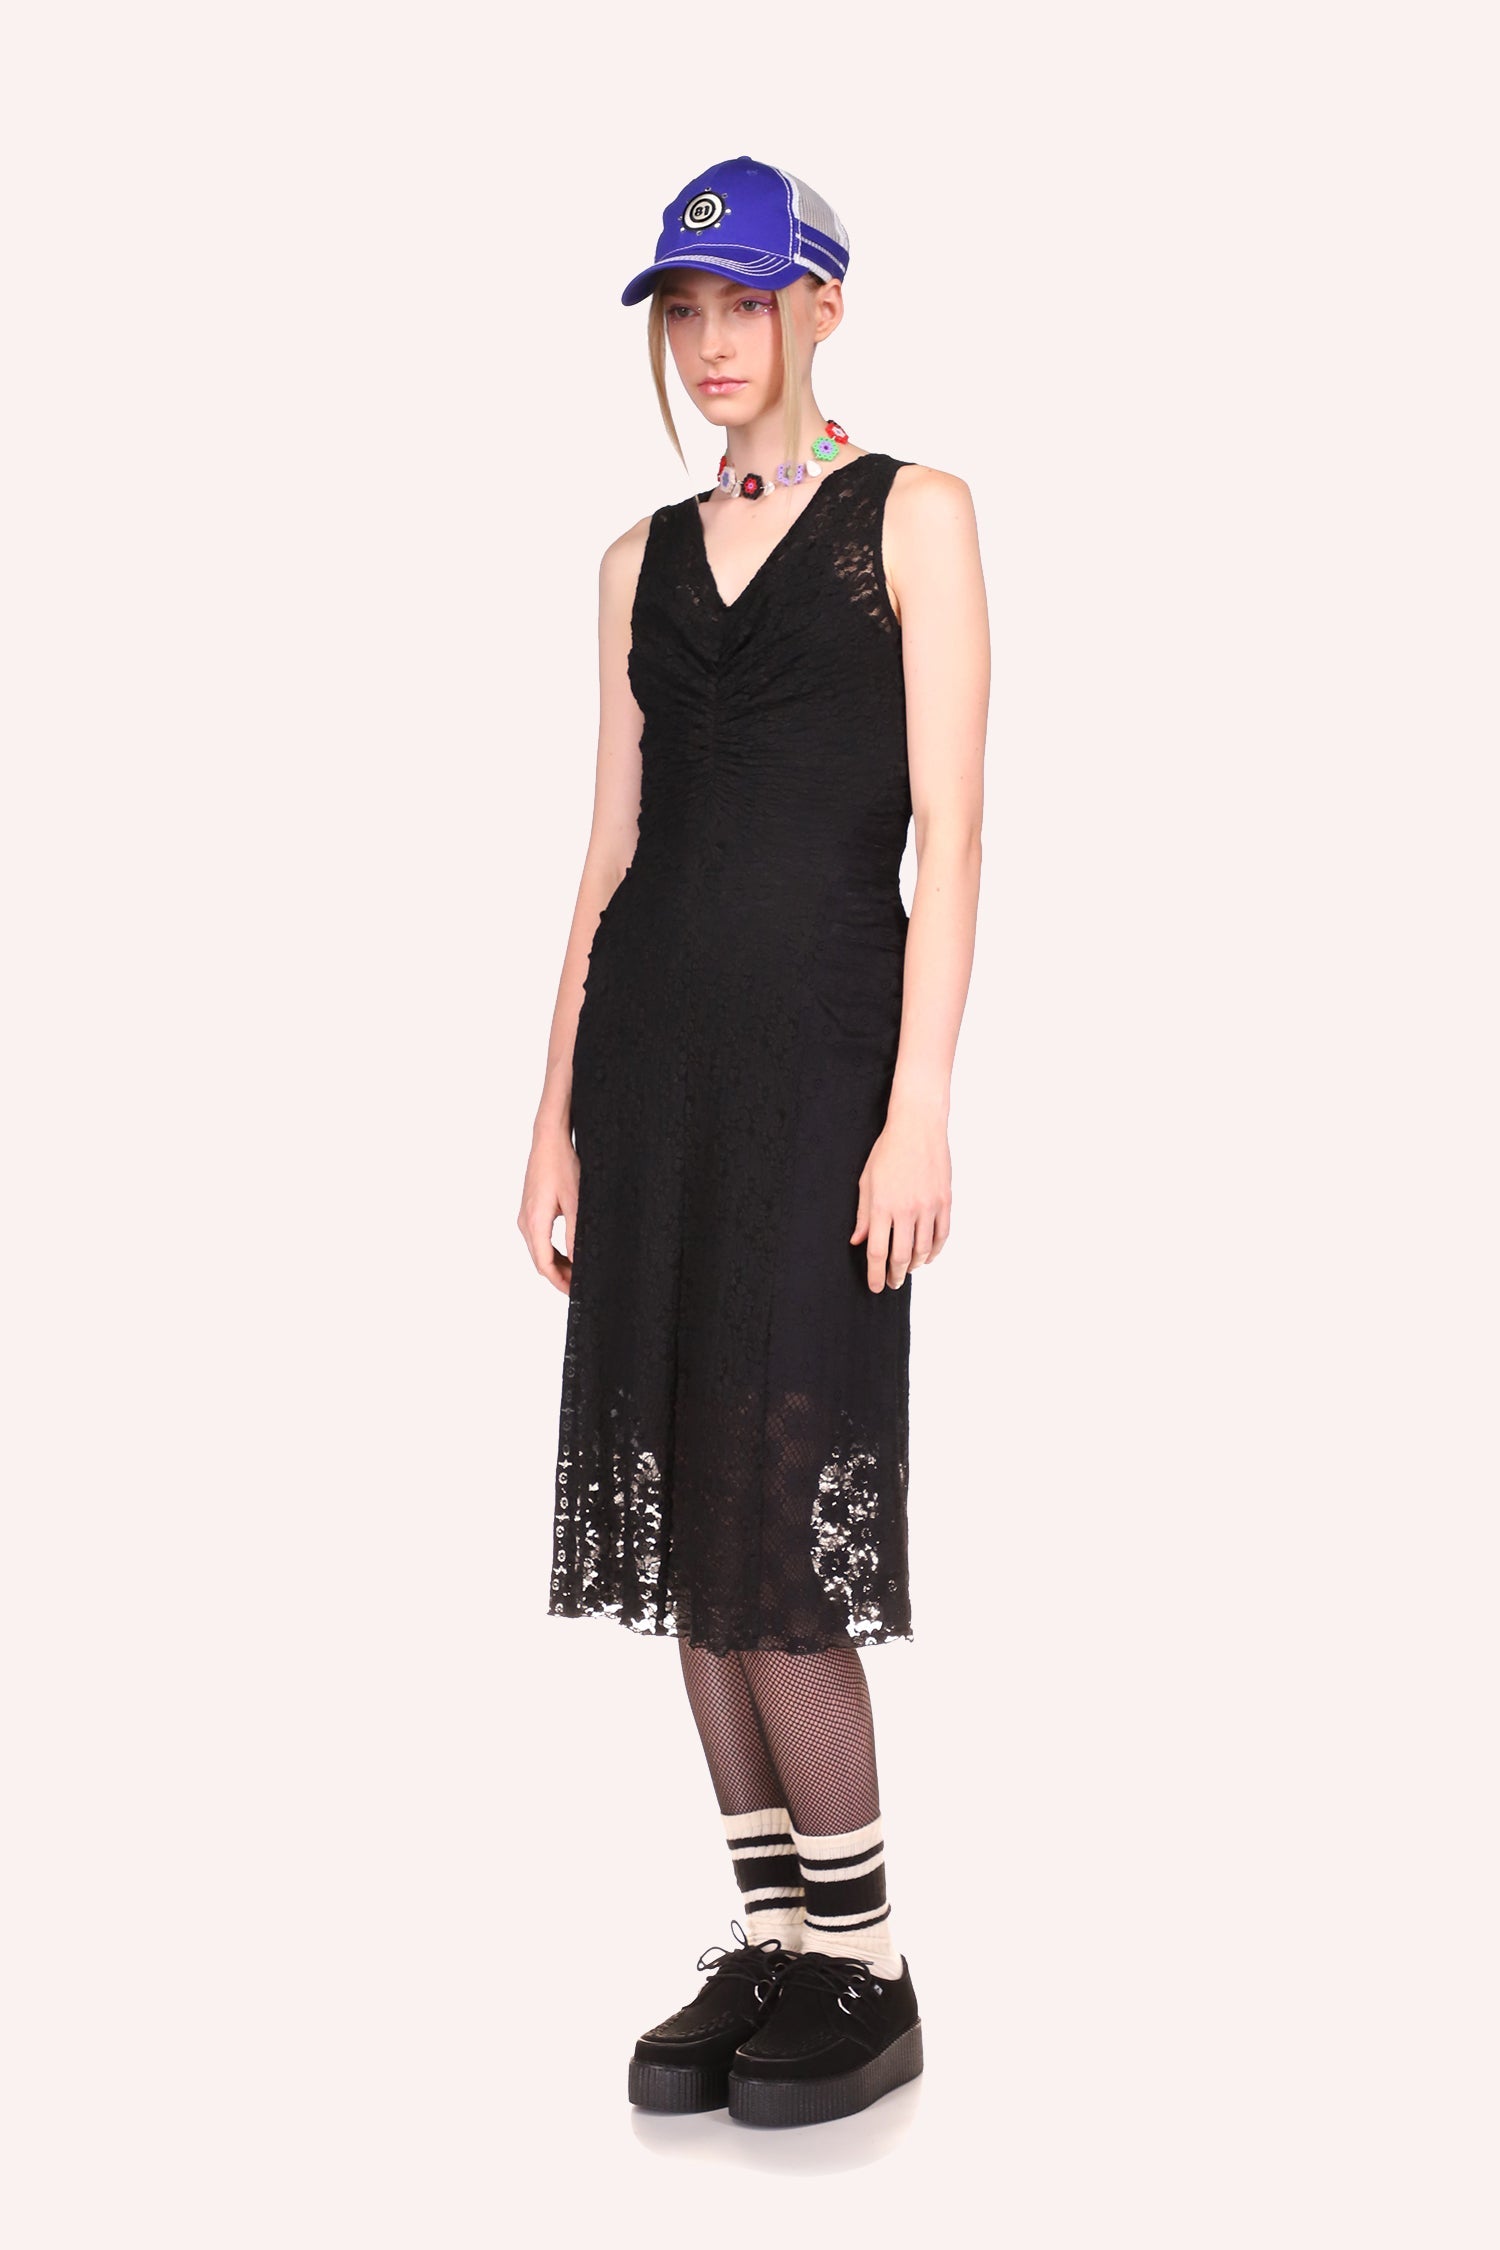 The lace fabric dress offers a sheer view of your outline, from knee down is black lace